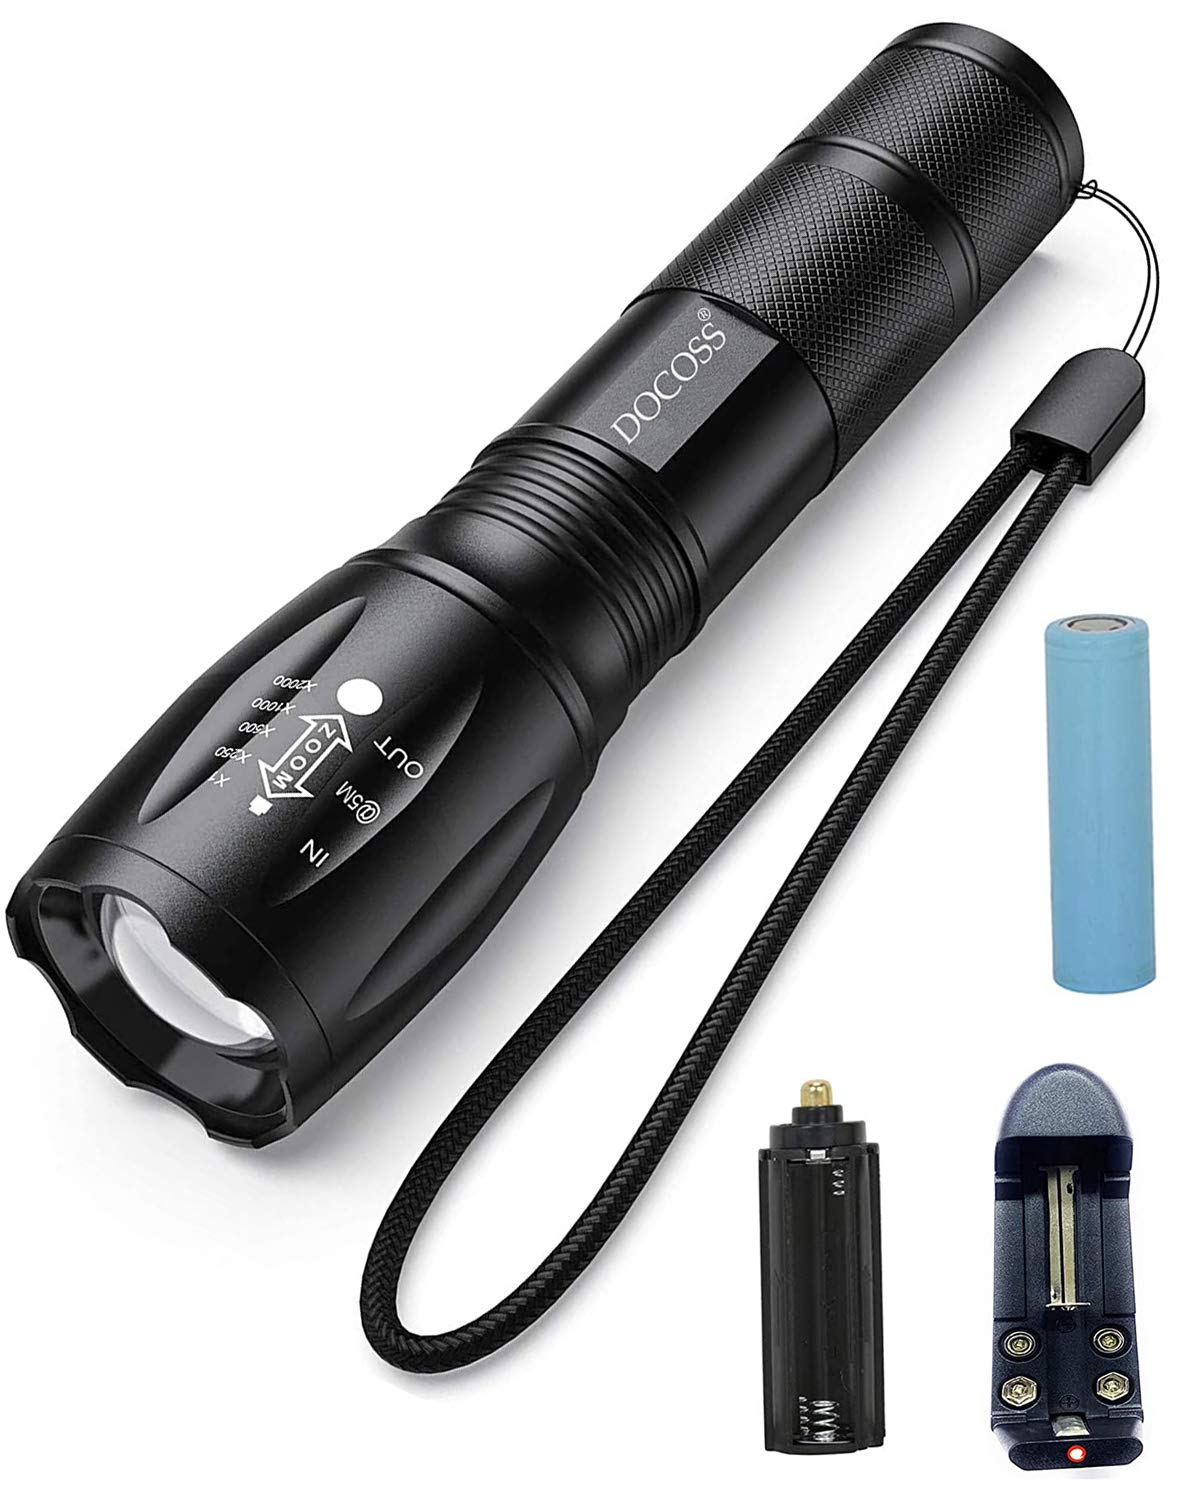 DOCOSS 5 Modes Torch Lights Rechargeable Lights Ultra Bright Cree Led Torch Light Water Resistant High Power Long Distance With Adjustable Focus & Charger (Black, Metal)